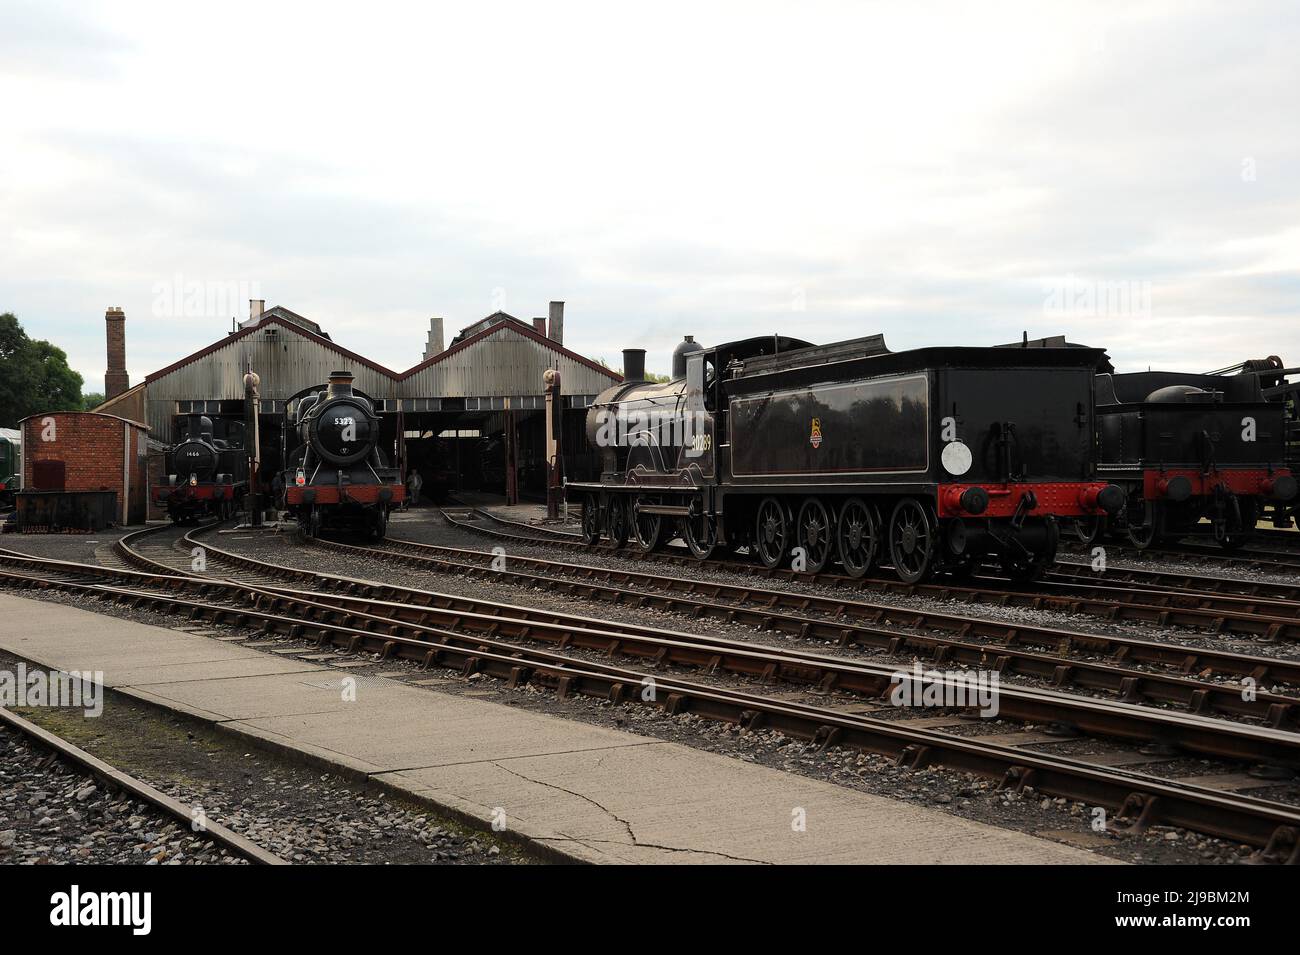 '1466', '5322' and '30120' (running as '30289') on shed at Didcot. Stock Photo